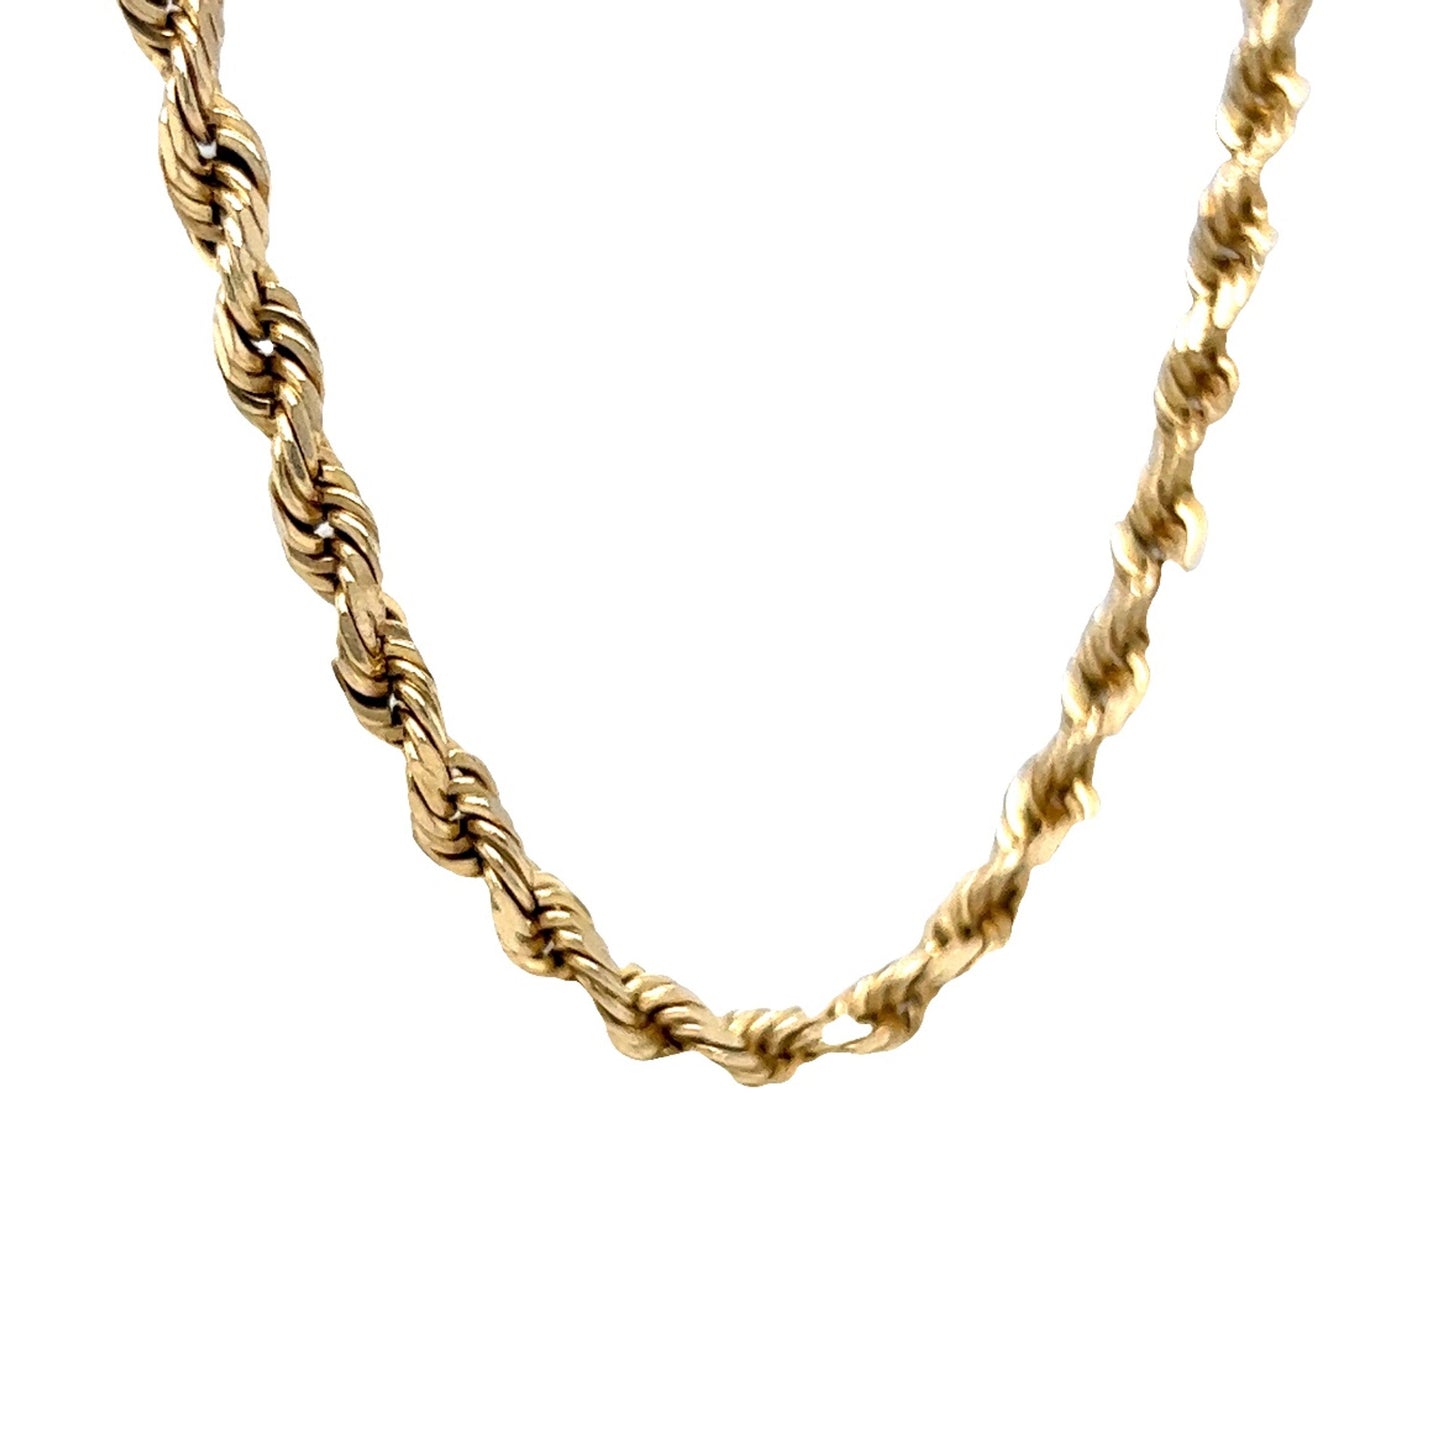 24 Inch Chain Necklace in 10k Yellow Gold